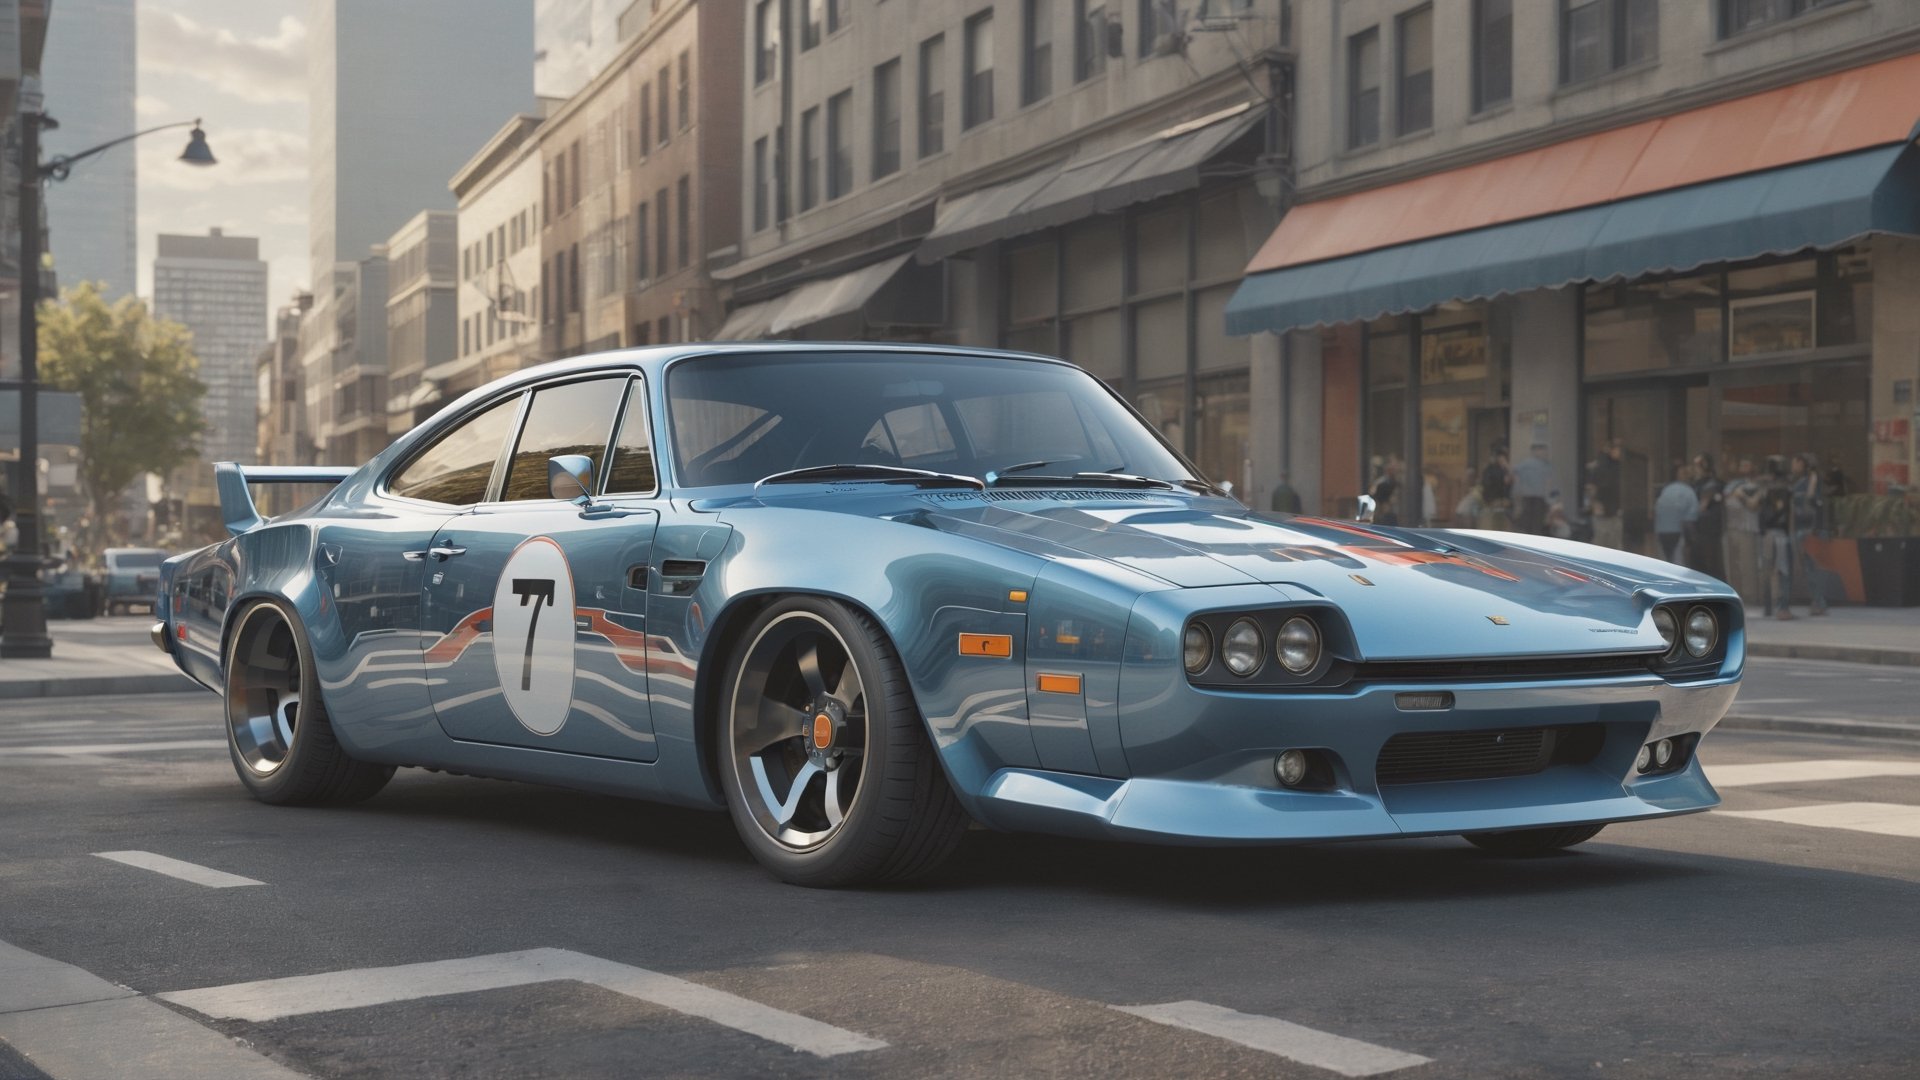 A futuristic hi-tech Porsche inspired by Dodge Charger 1970, parked in city area background, perspective view, symmetrical, anime livery on car, more detail XL, photorealistic